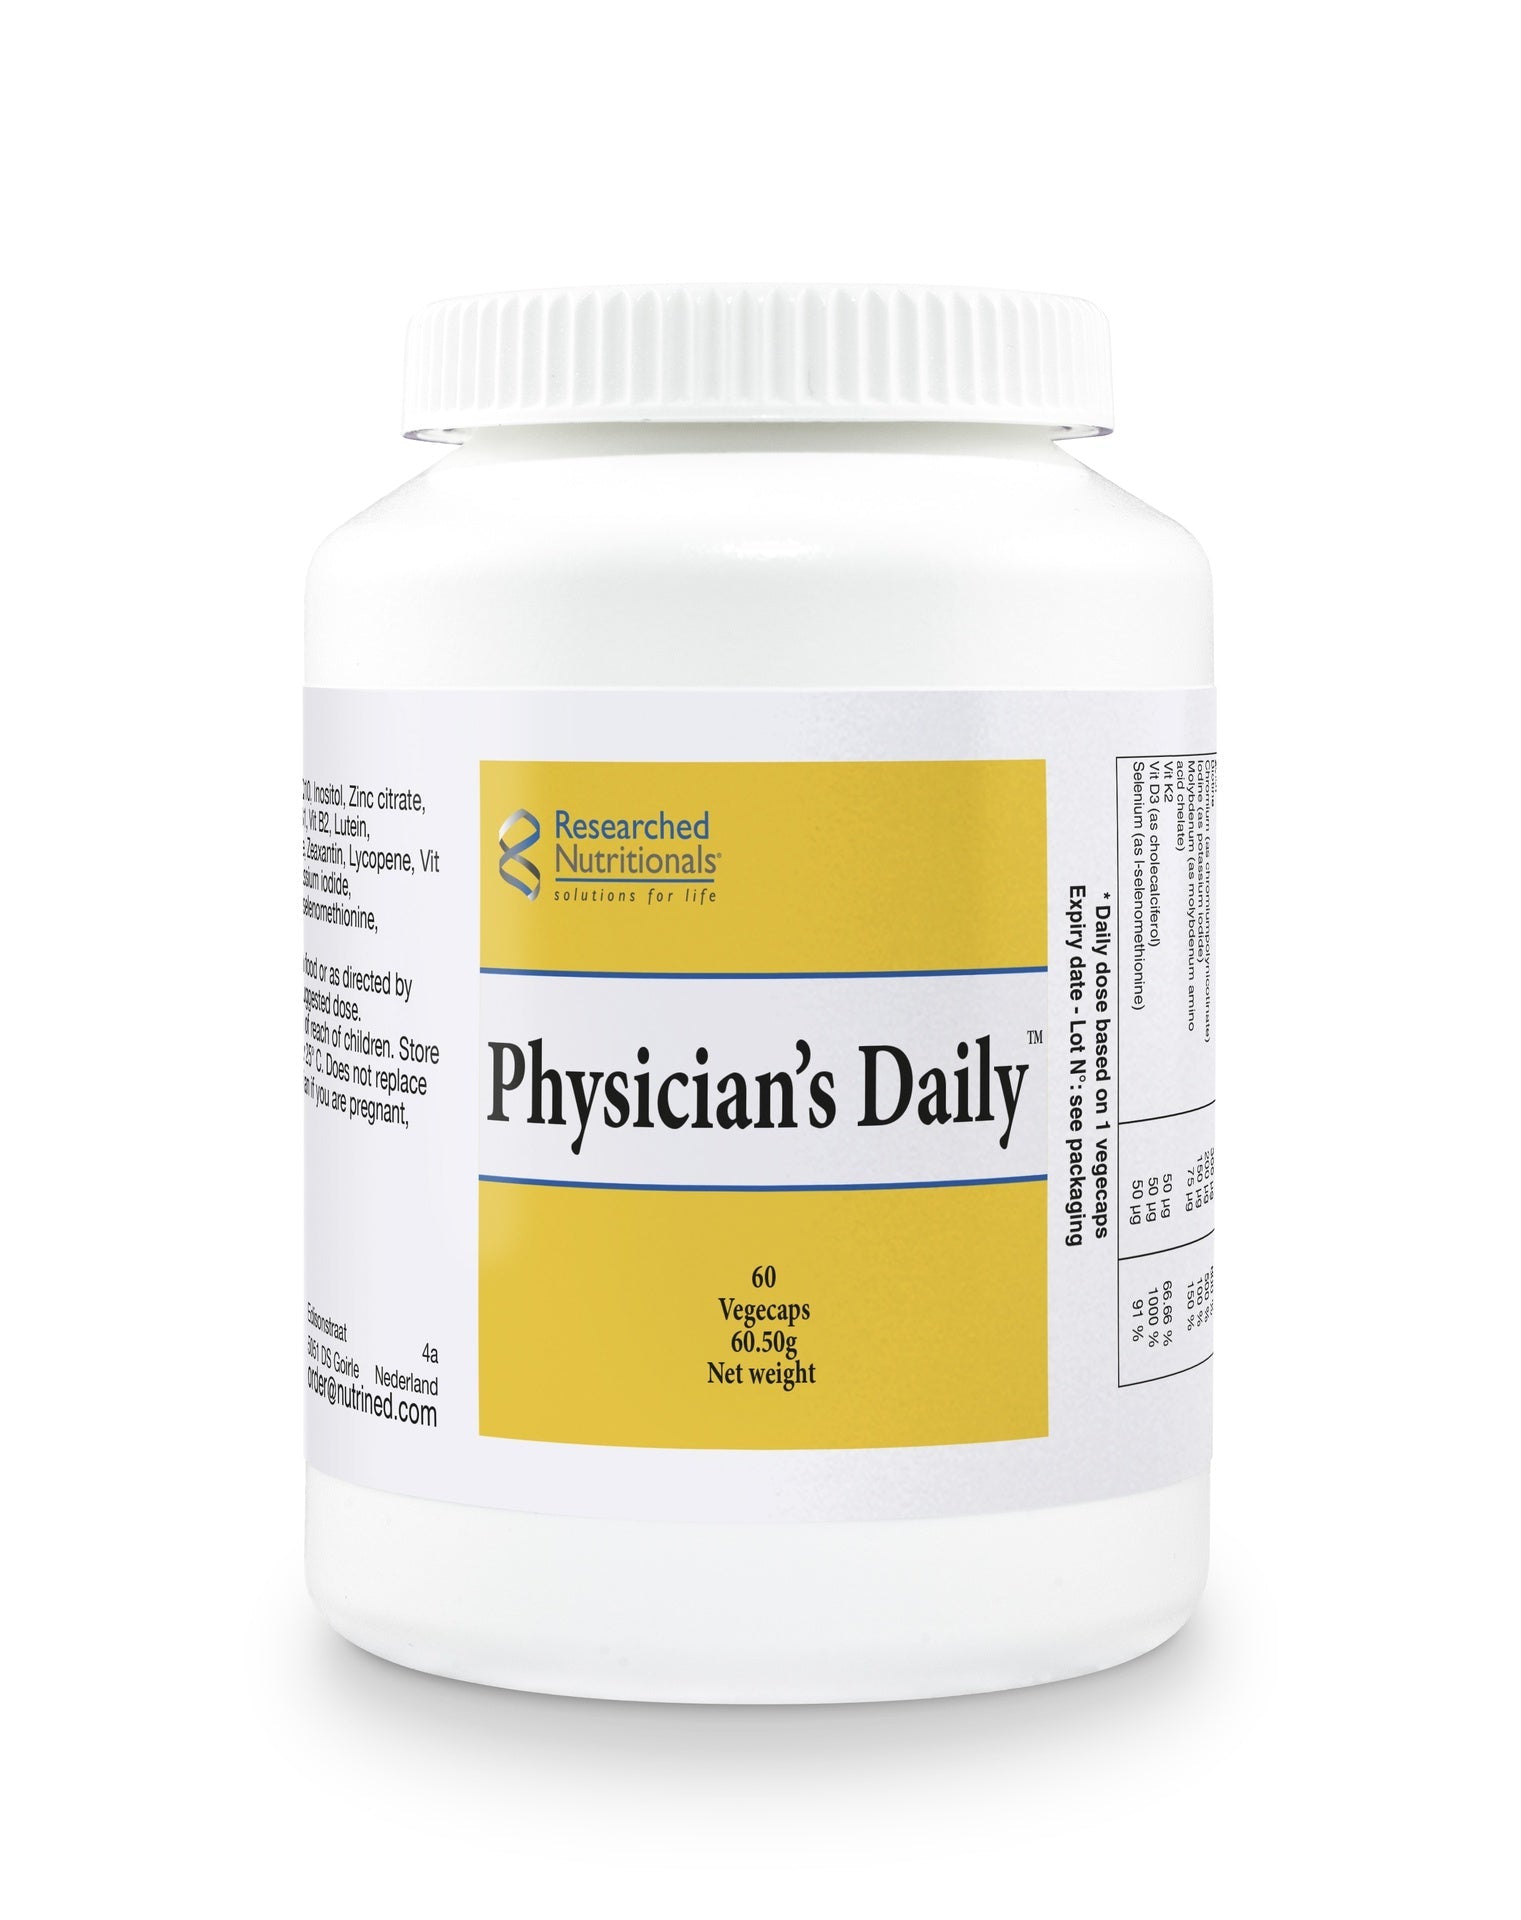 Physician's Daily Multivitamin - 60 Capsules | Researched Nutritionals